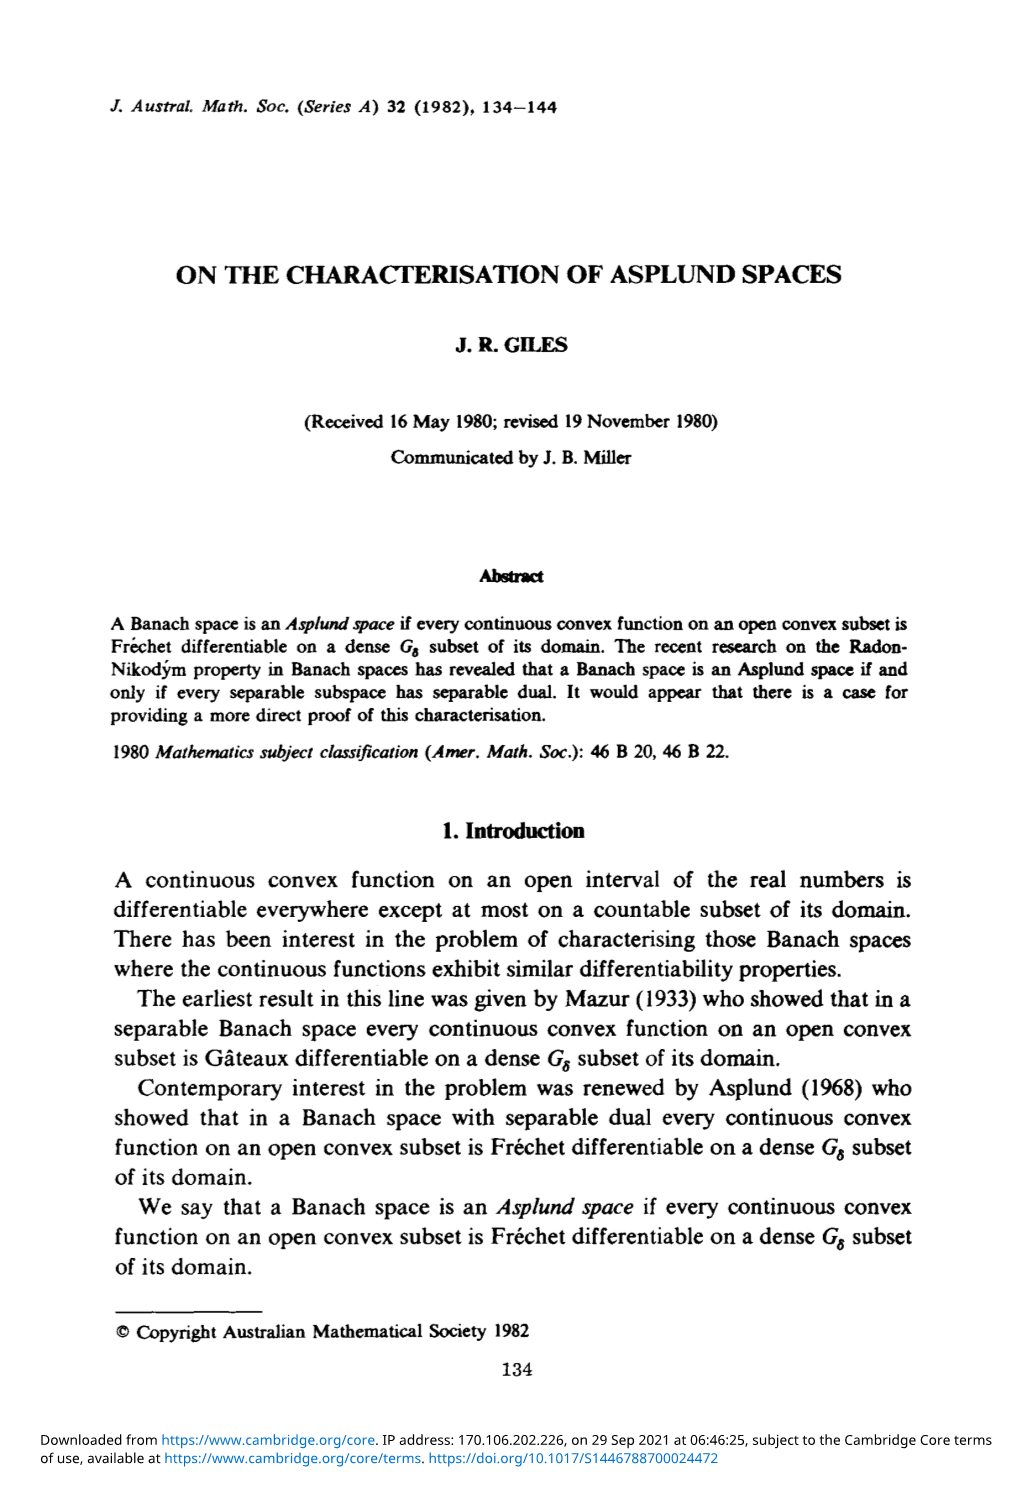 On the Characterisation of Asplund Spaces